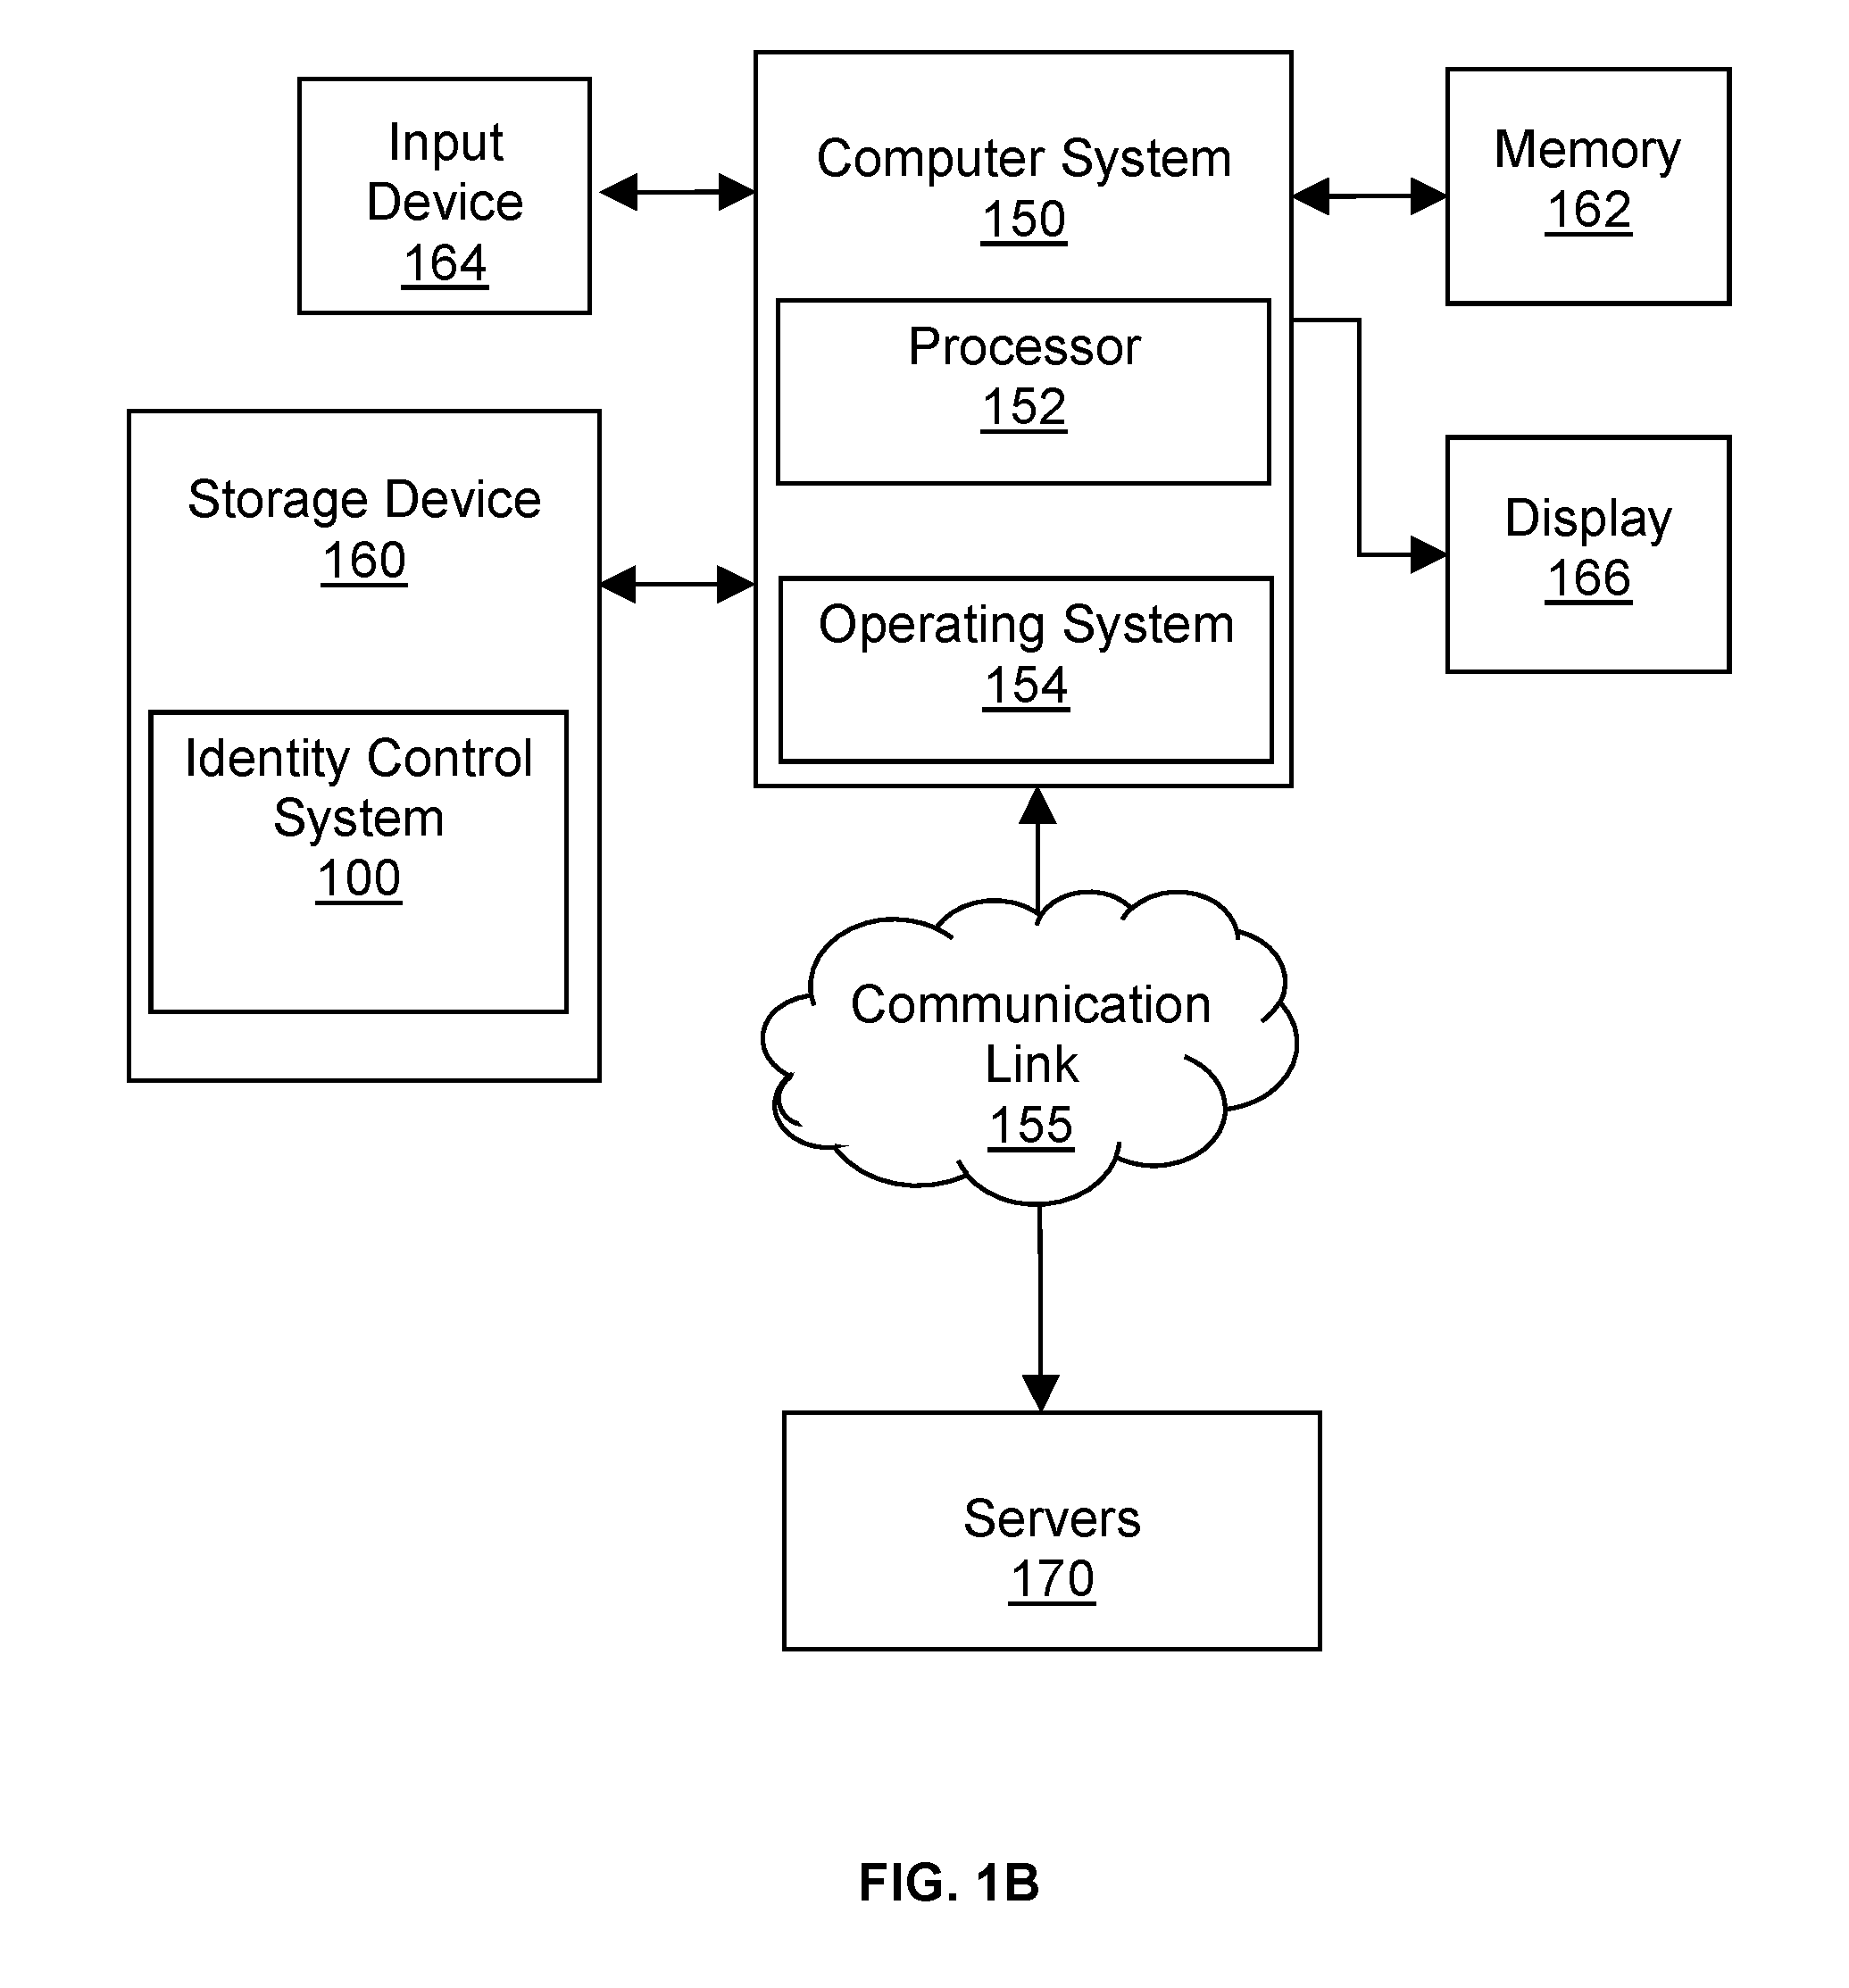 Method and Computer Program Product for Implementing an Identity Control System